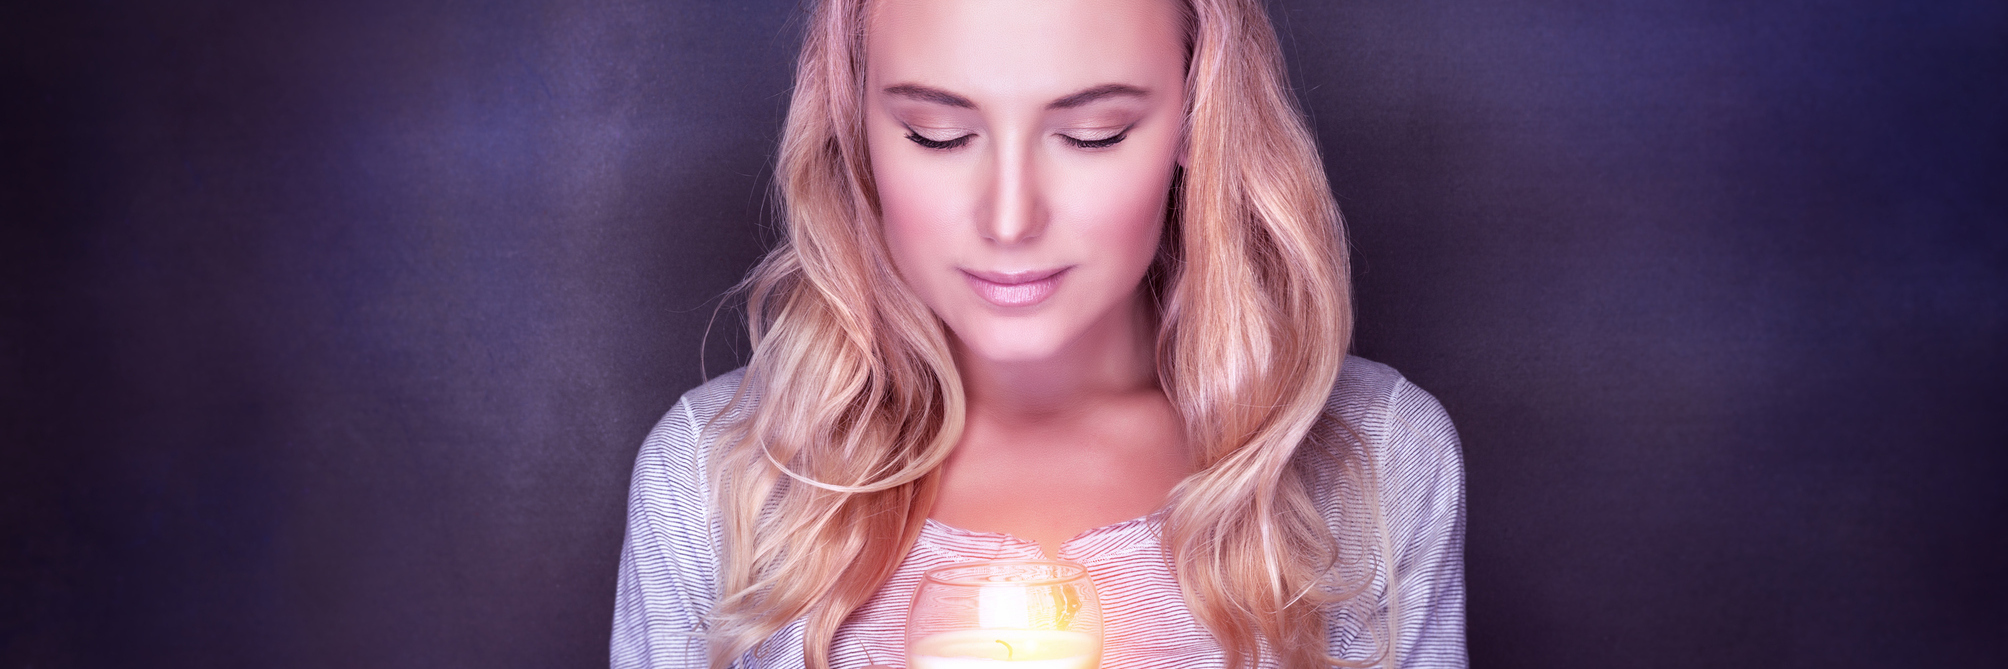 A woman in front of a dark background hodls a burning candle.